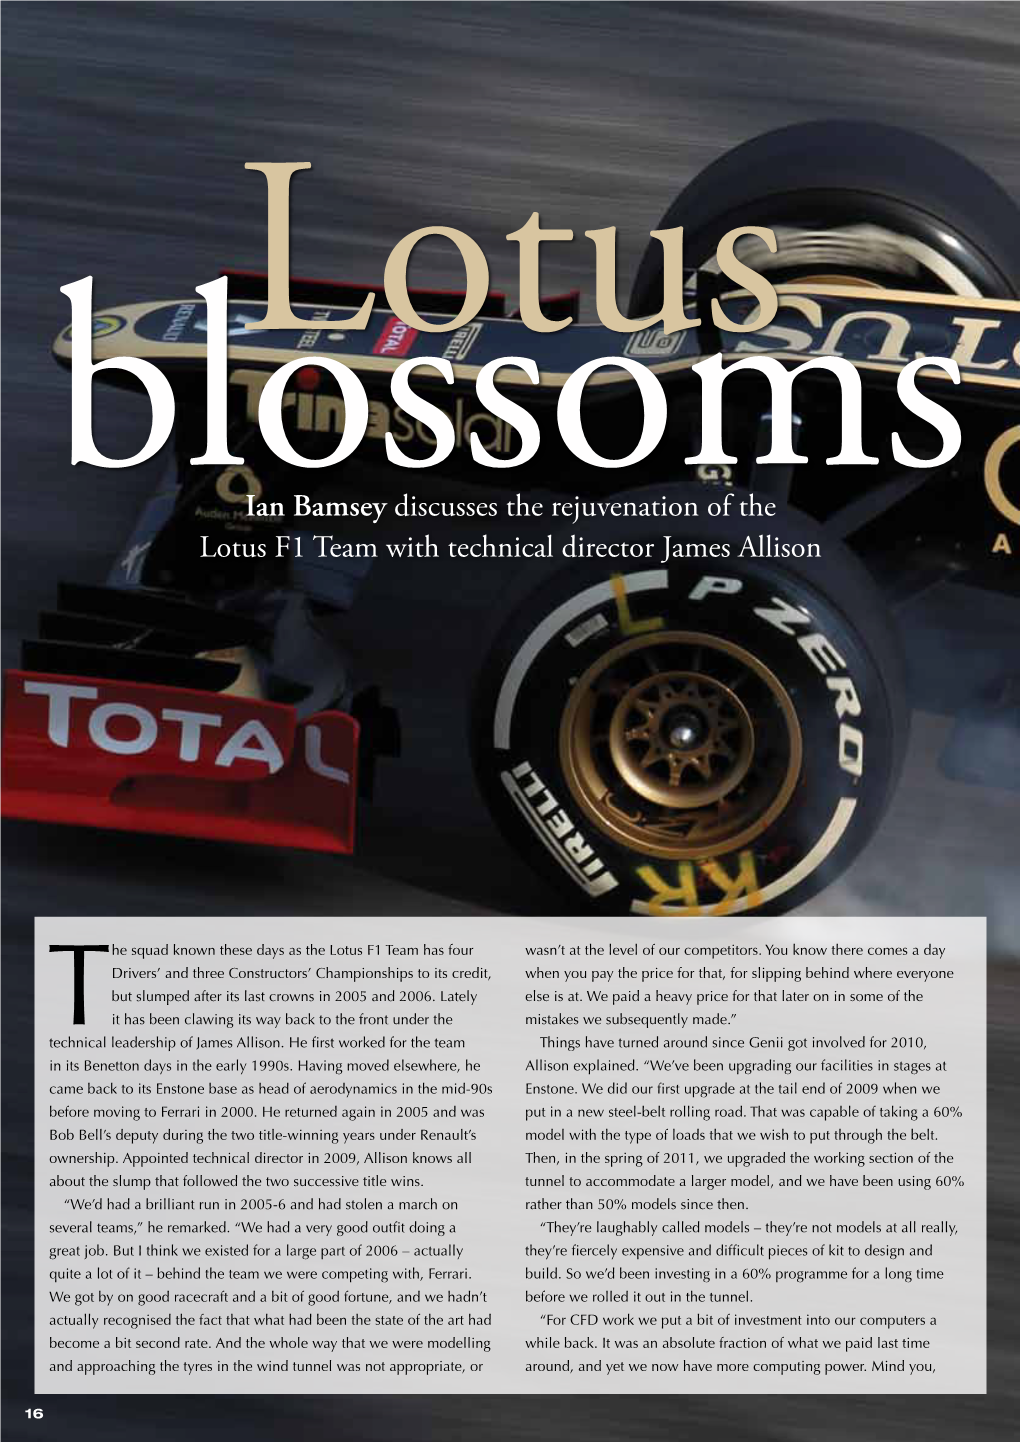 Ian Bamsey Discusses the Rejuvenation of the Lotus F1 Team with Technical Director James Allison